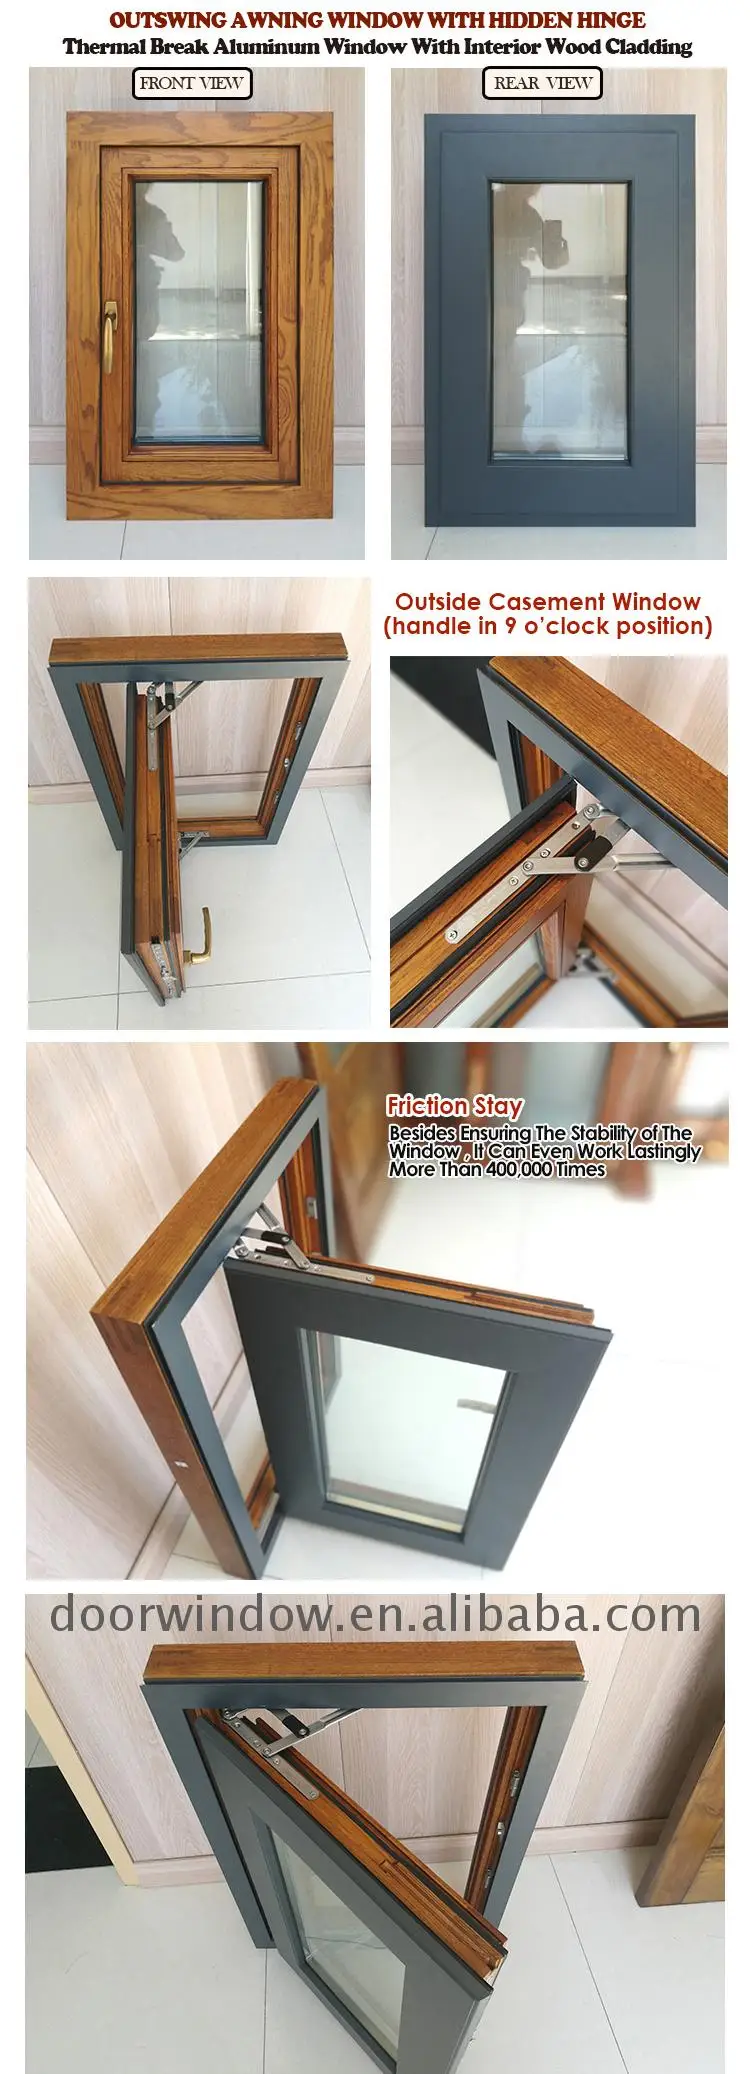 The newest outward opening window casement old wood windows for sale